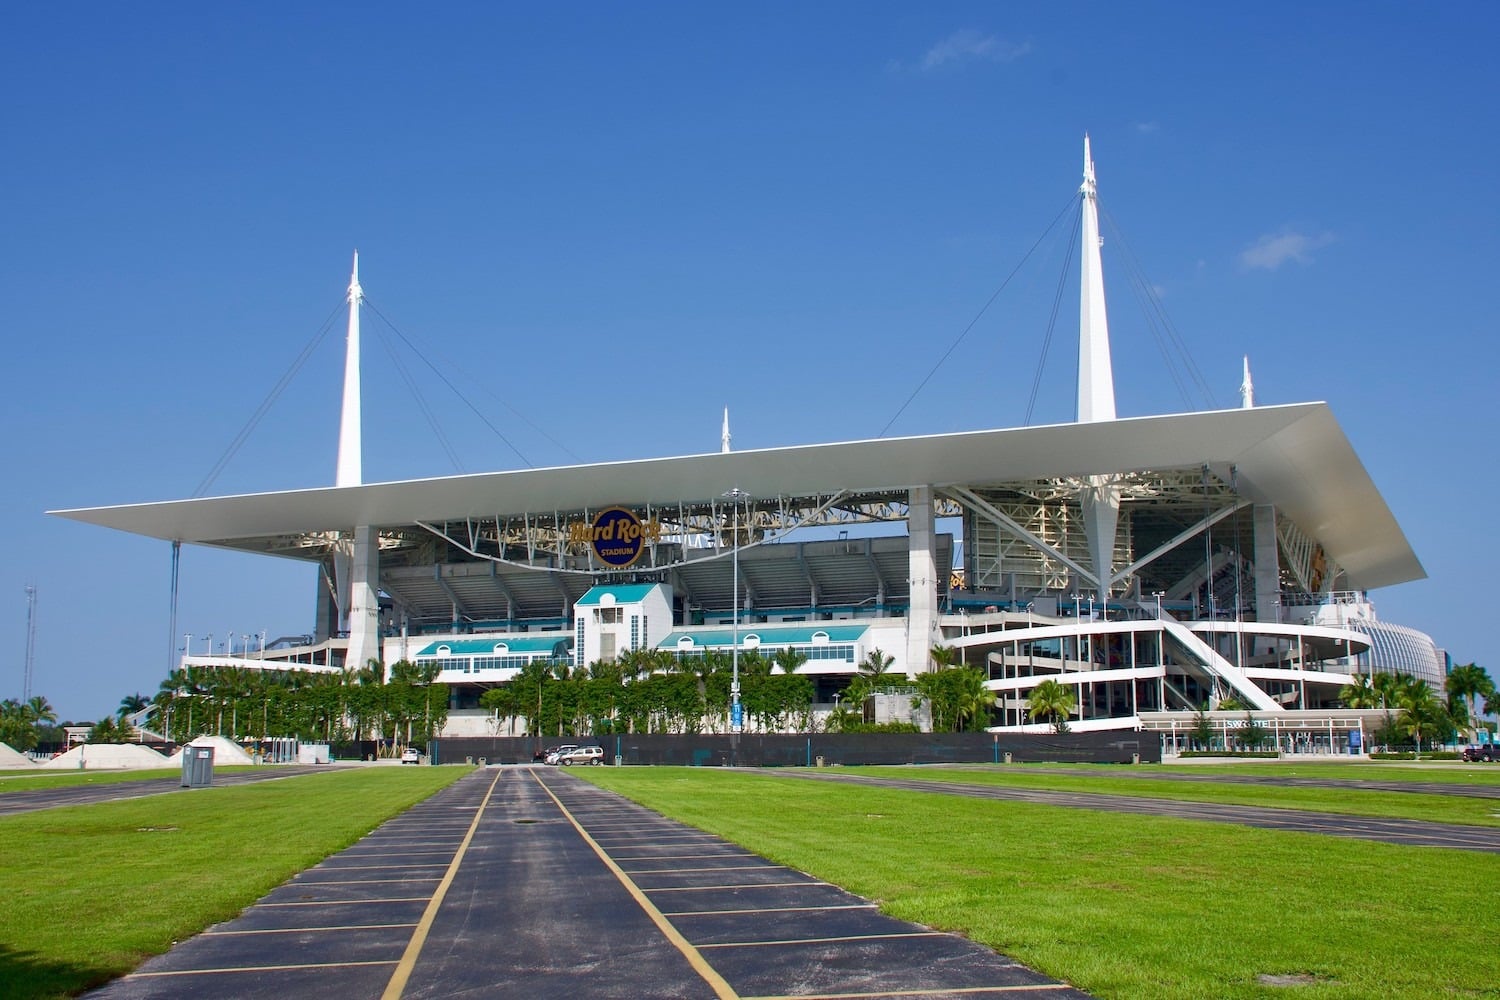 Hard Rock Stadium, Home Of The Miami Dolphins. Photo Credit: Valerie | Under Creative Commons License